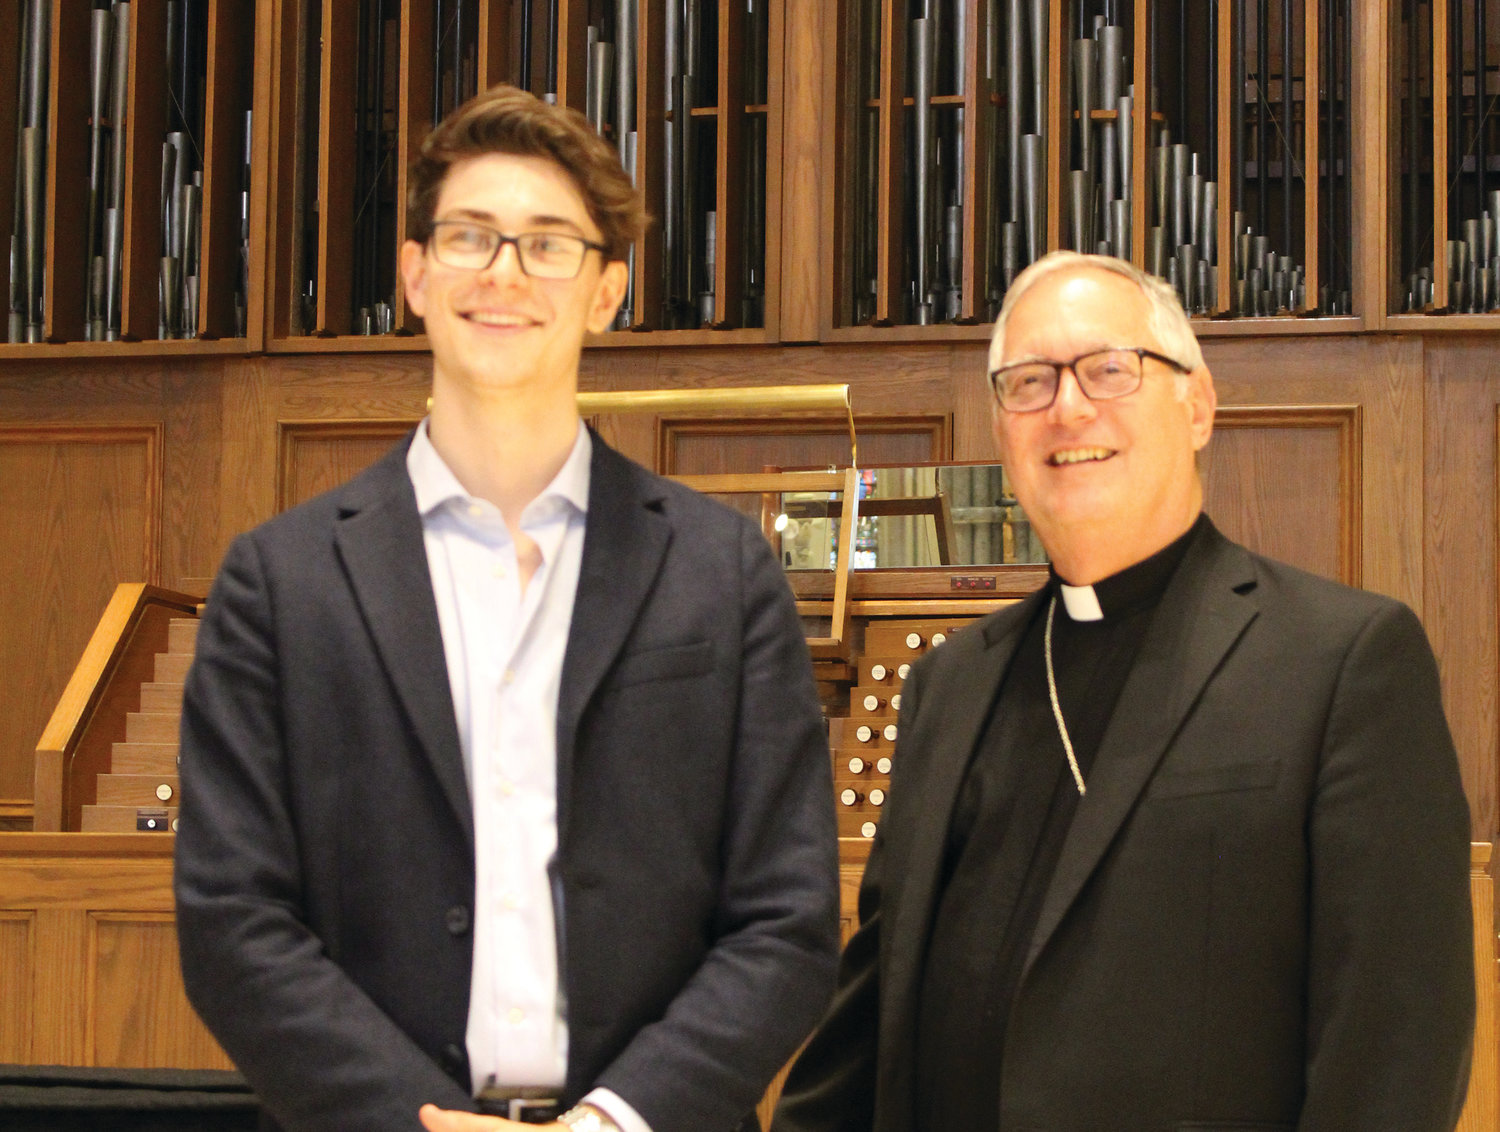 Bishop Thomas J. Tobin, family and friends were present for Schneider’s June 25 organ recital that marked his final concert as a student at the Pontifical Institute of Sacred Music.